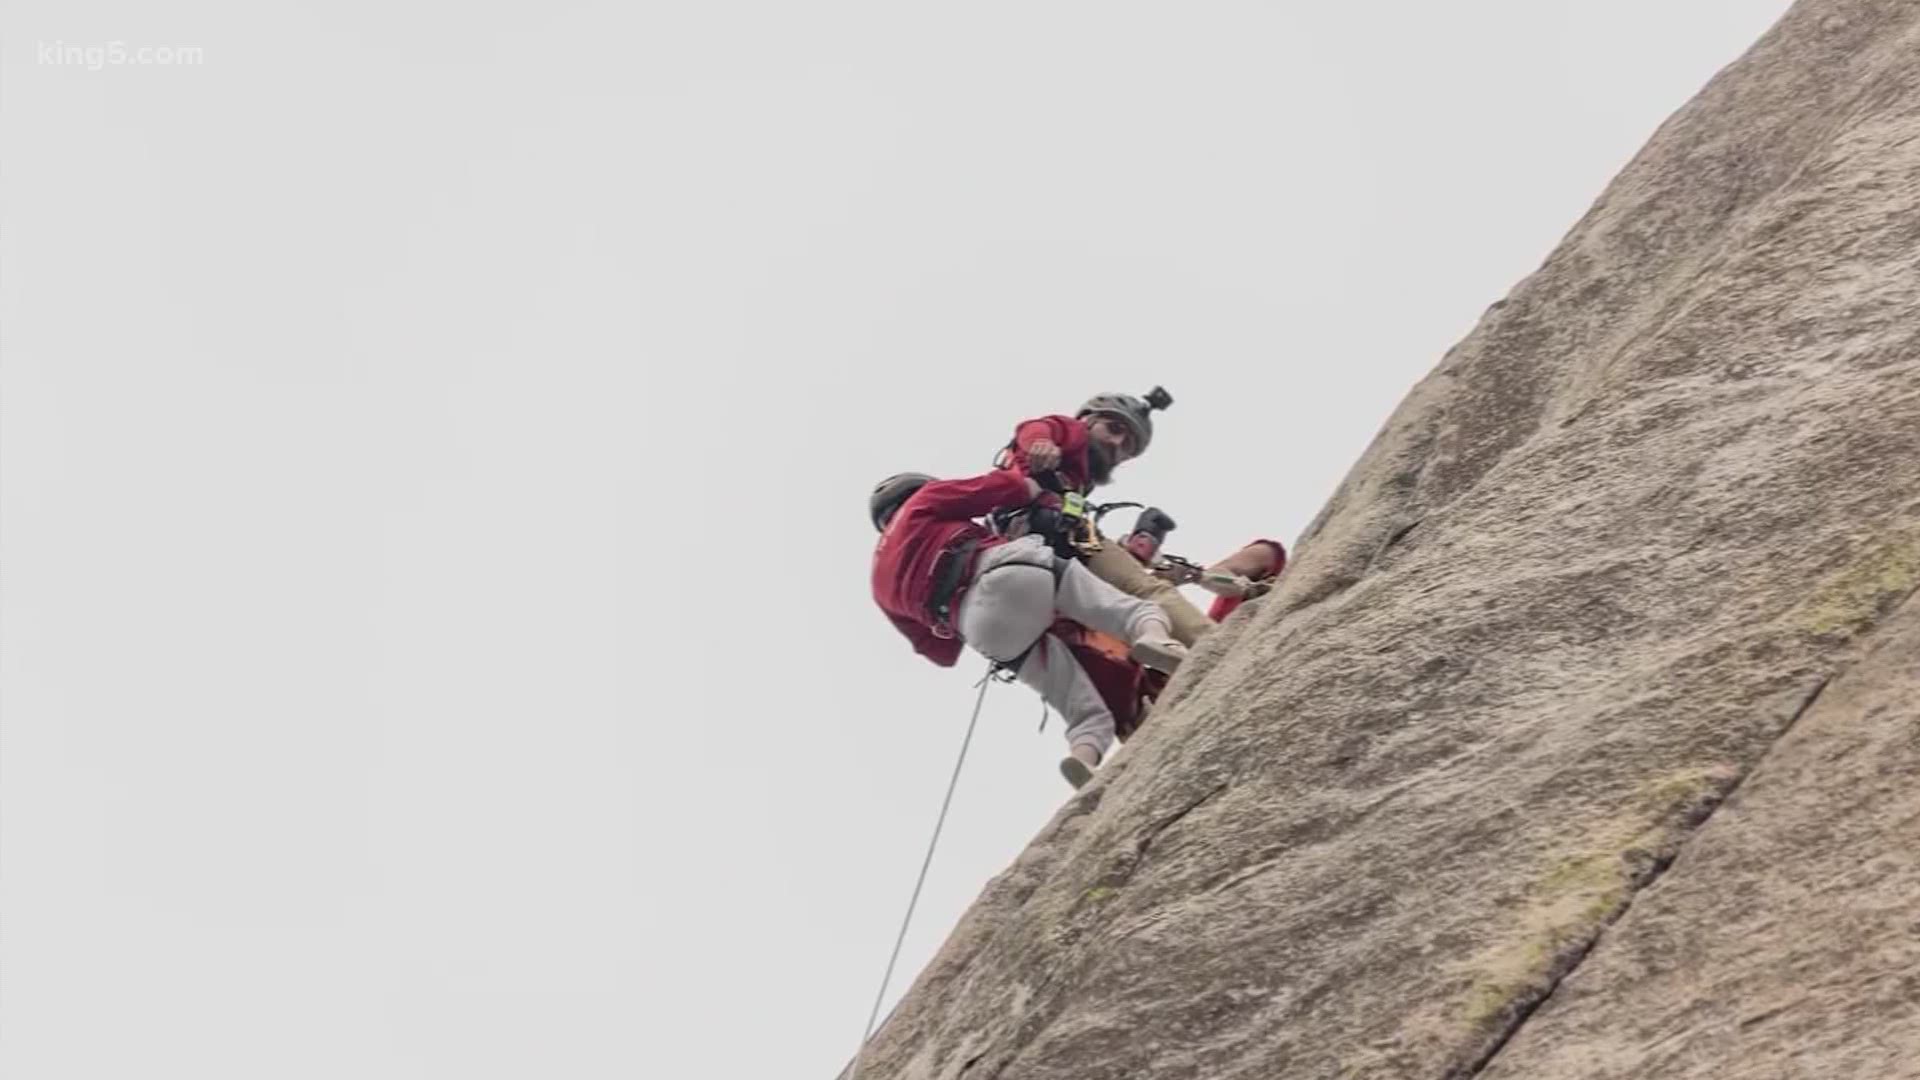 A Washington climbing team helped their friend, who has muscular dystrophy and uses a wheelchair, scale part of El Capitan in Yosemite National Park.